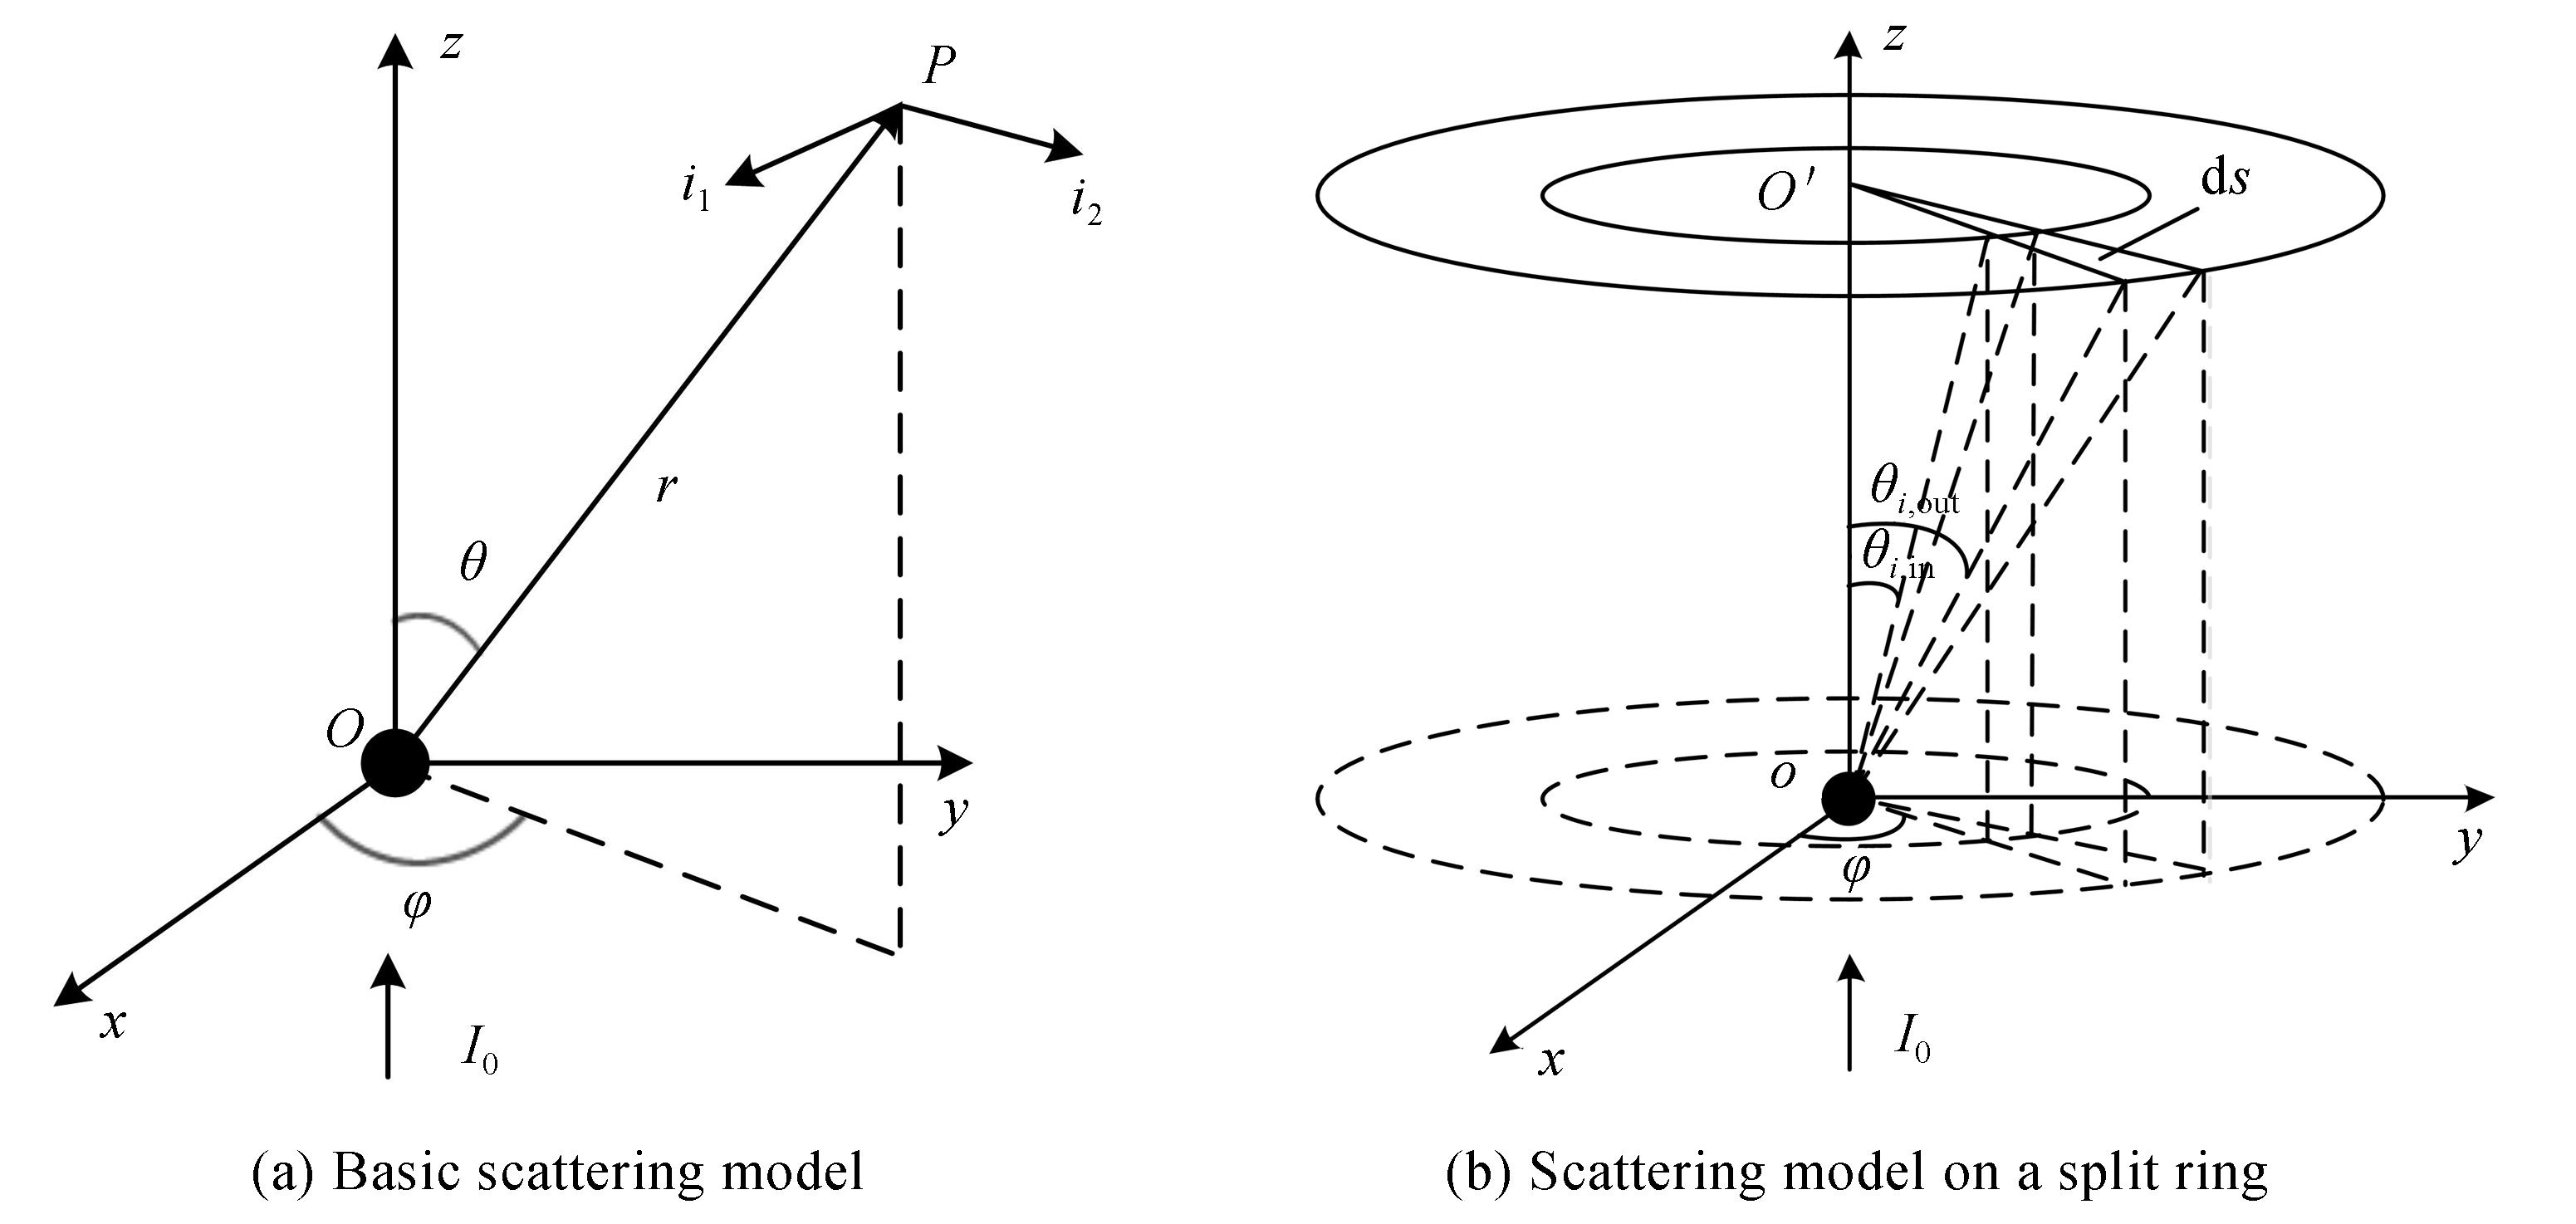 Single particle scattering model